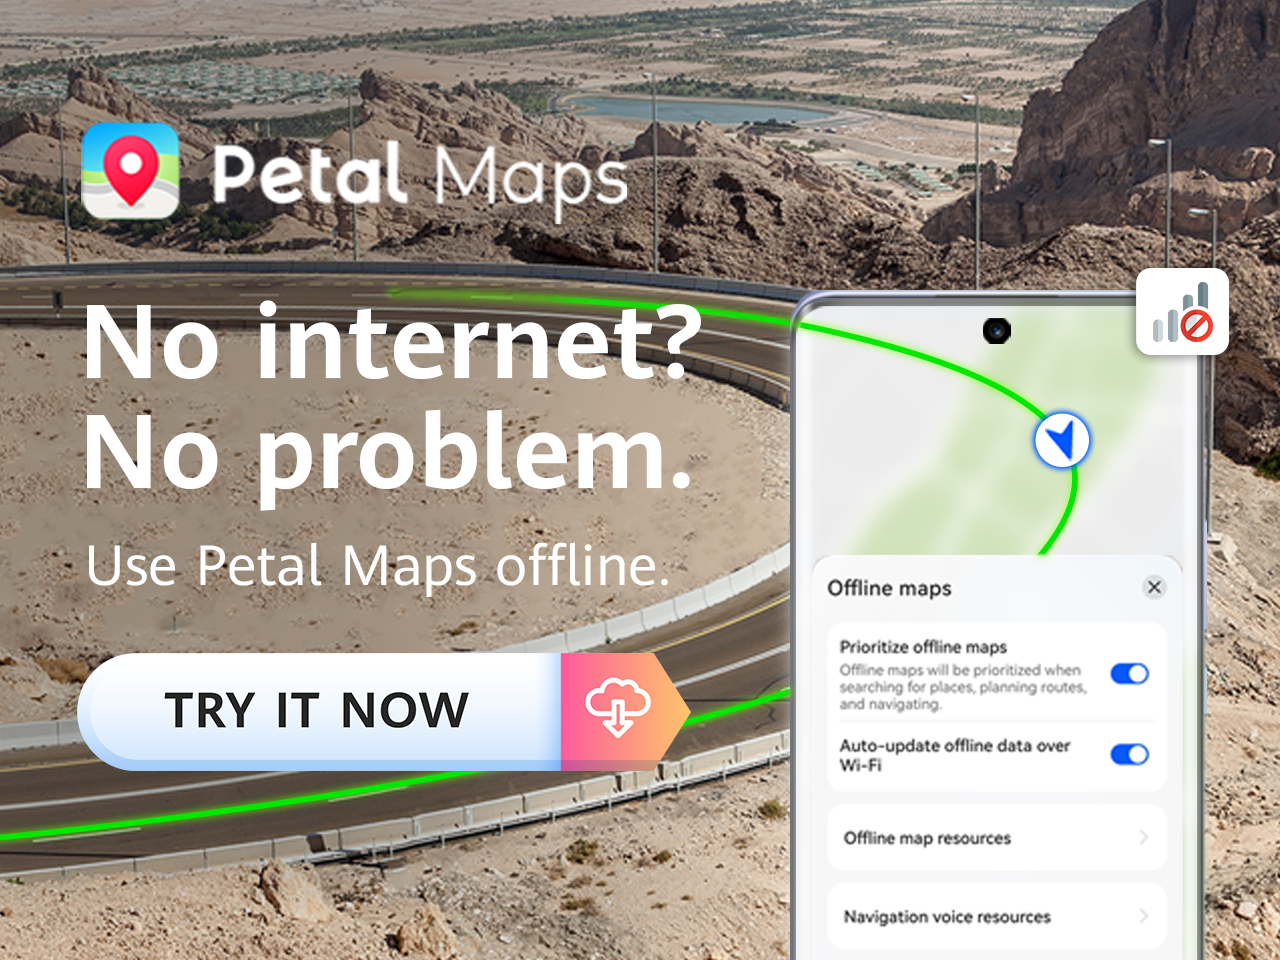 Petal Maps By Huawei Enhances Features For A Seamless Offline Navigation Experience